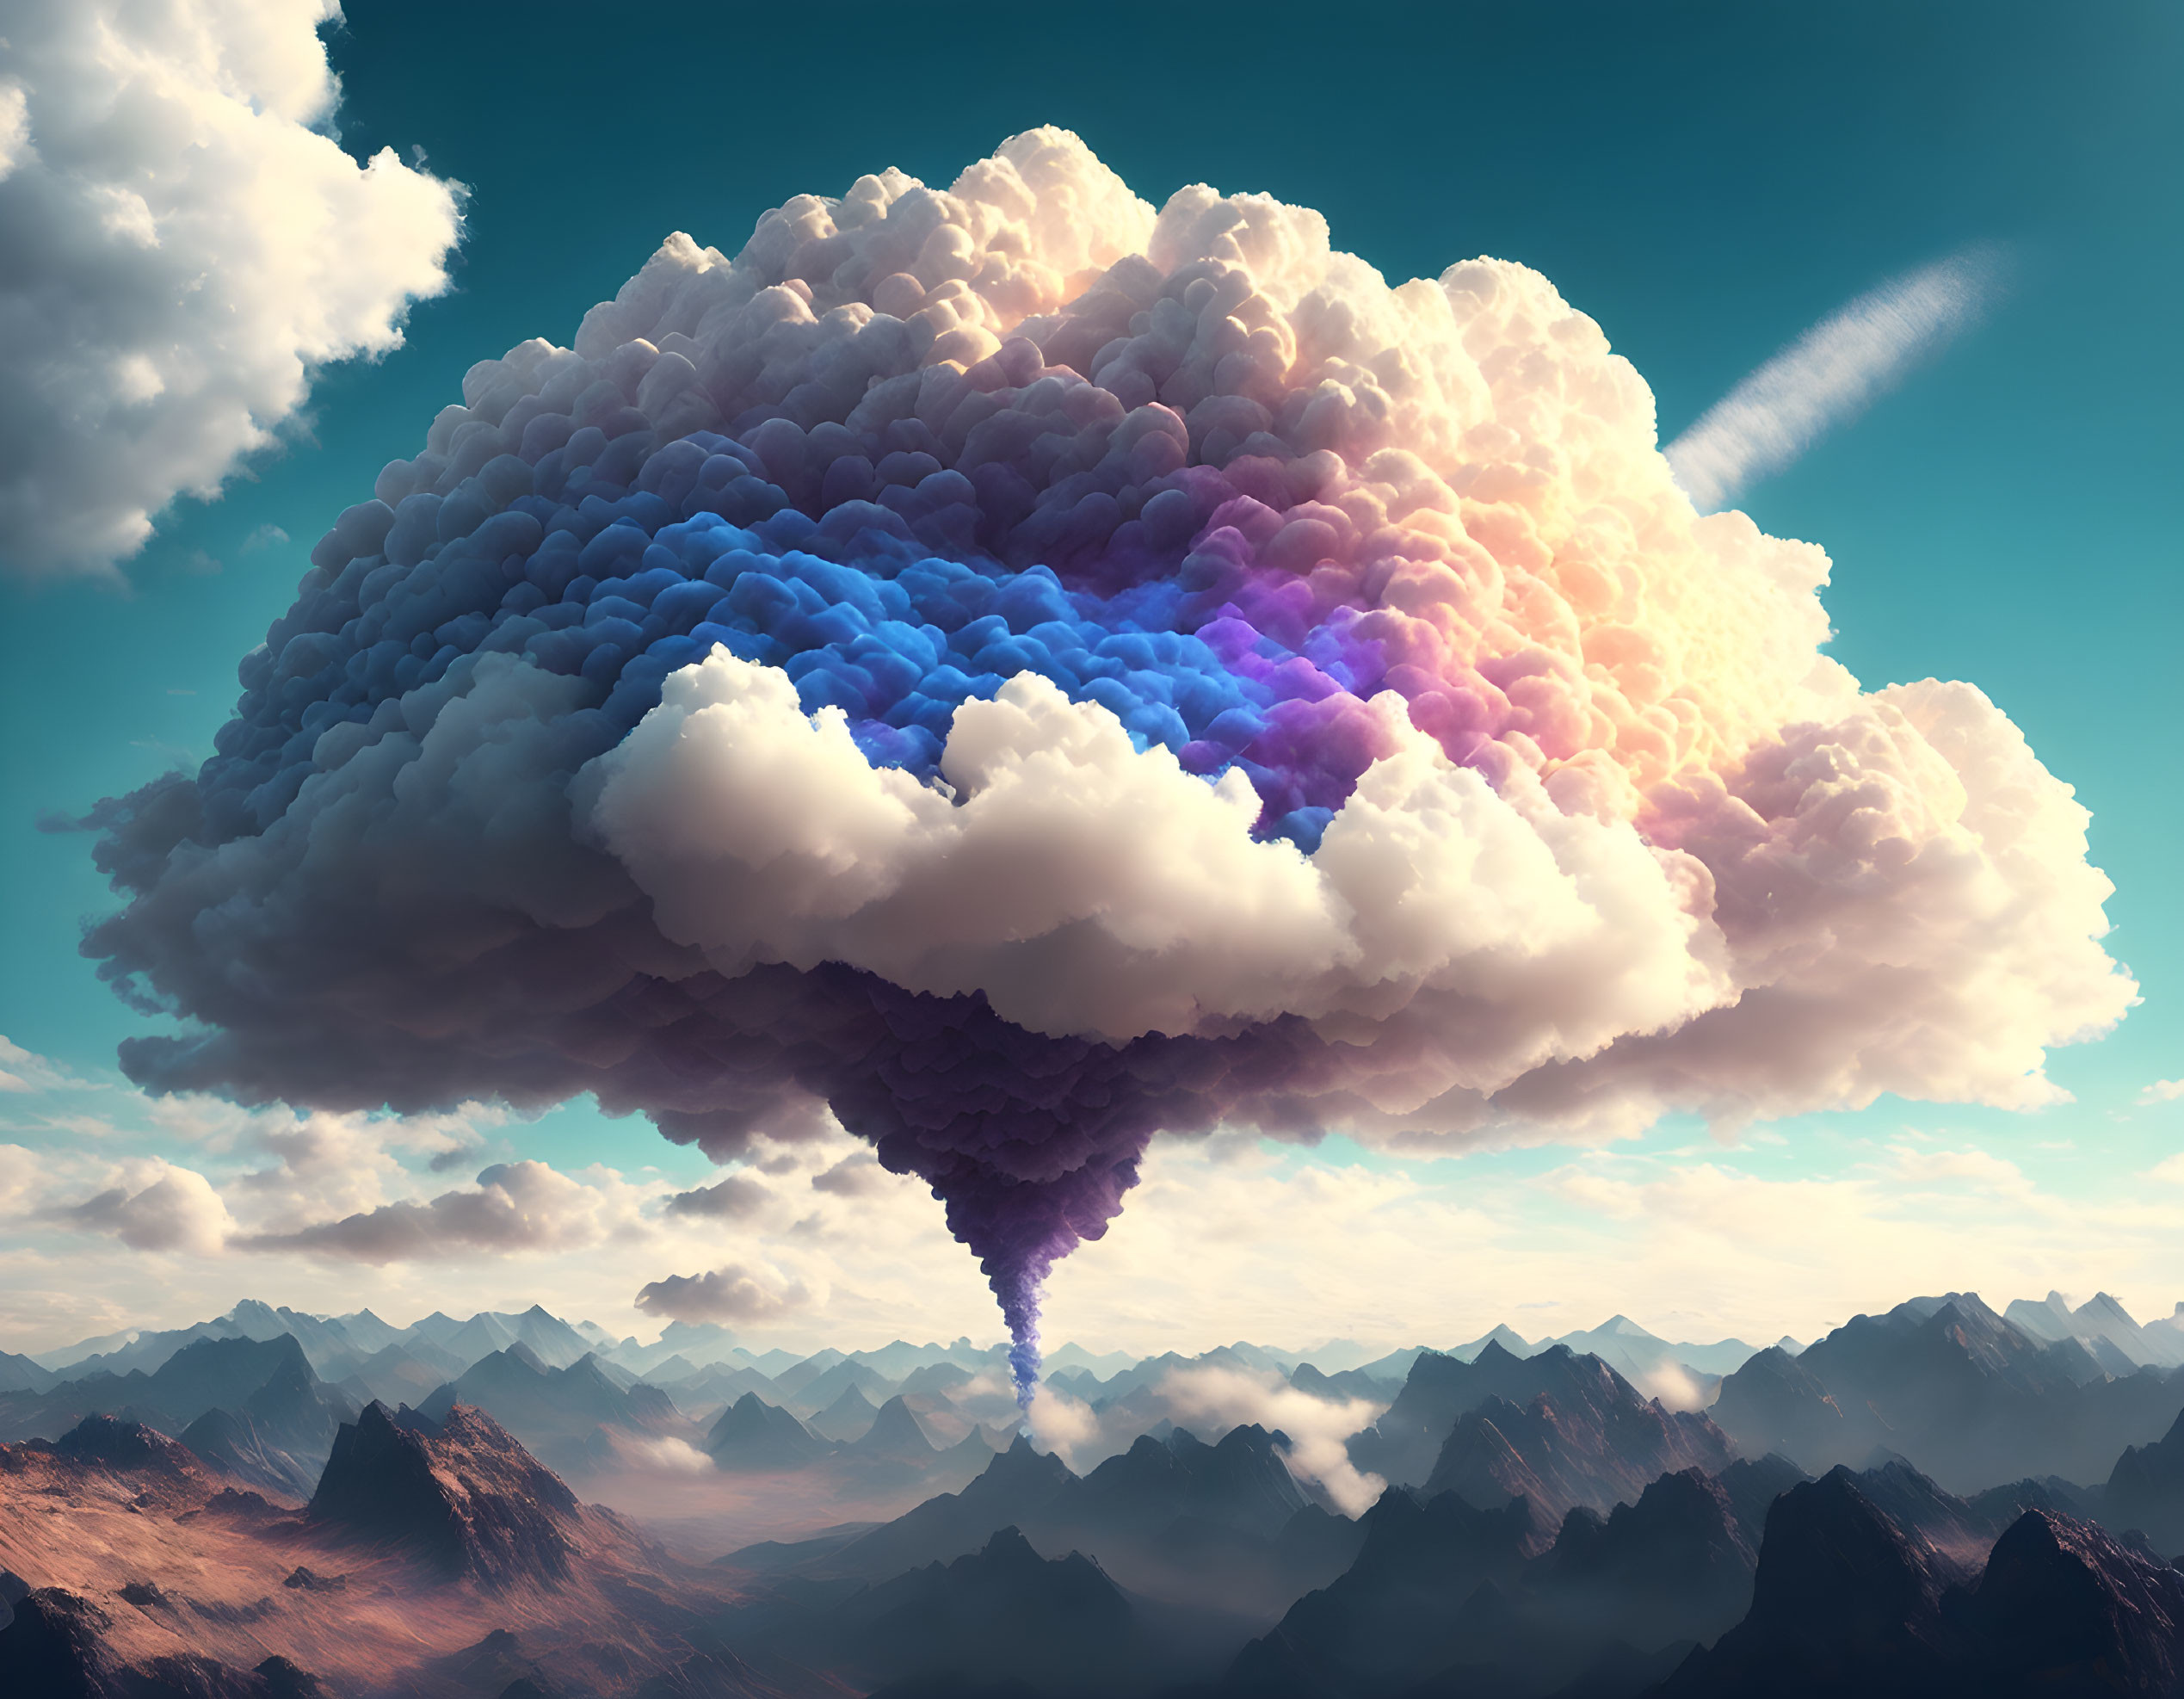 Multicolored cloud formation resembling a brain over rugged mountain landscape